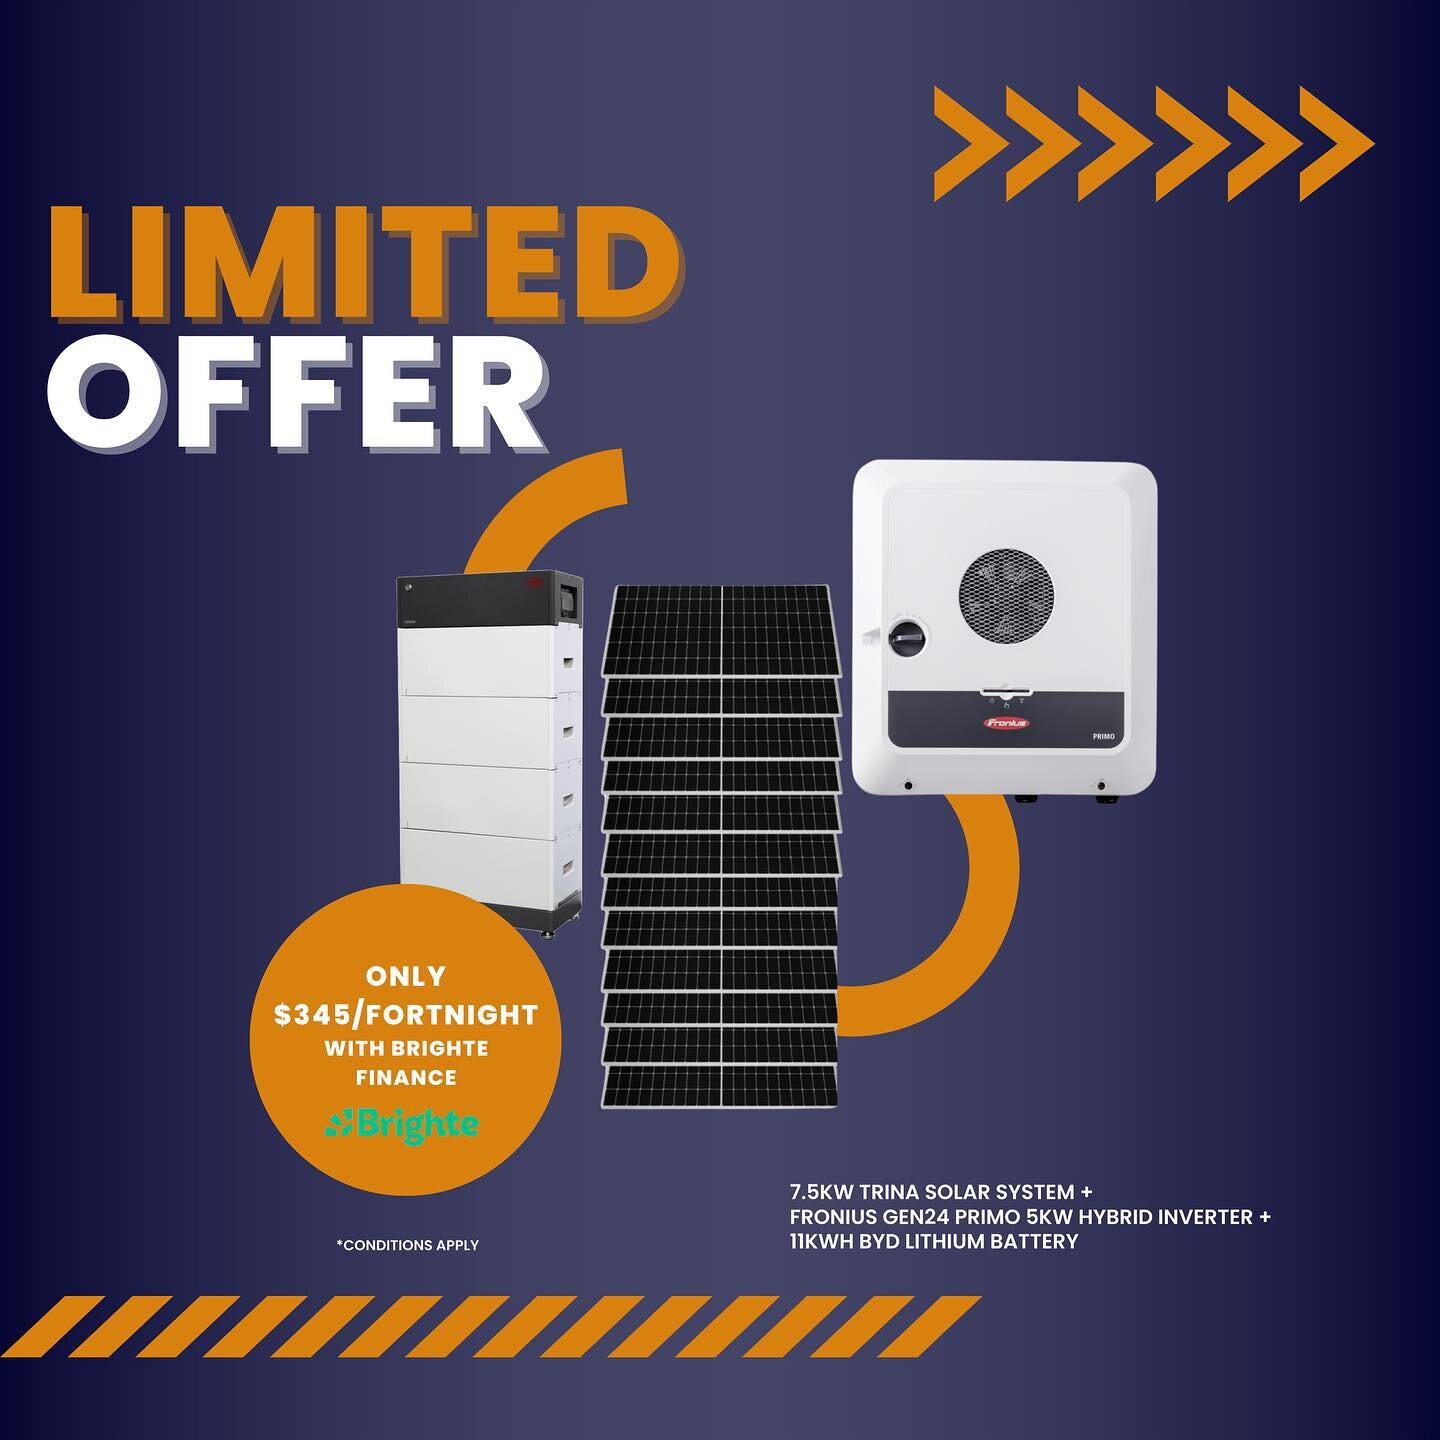 ☀☀☀LIMITED OFFER☀☀☀
Don't stress about the forecasted 2023 electricity rate rises! 📈 
Get ahead of it with a quality solar and battery system for your home.
For a limited time WPES is offering:
- 7.5KWh Trina Solar System (25-year warranty)
- Froniu